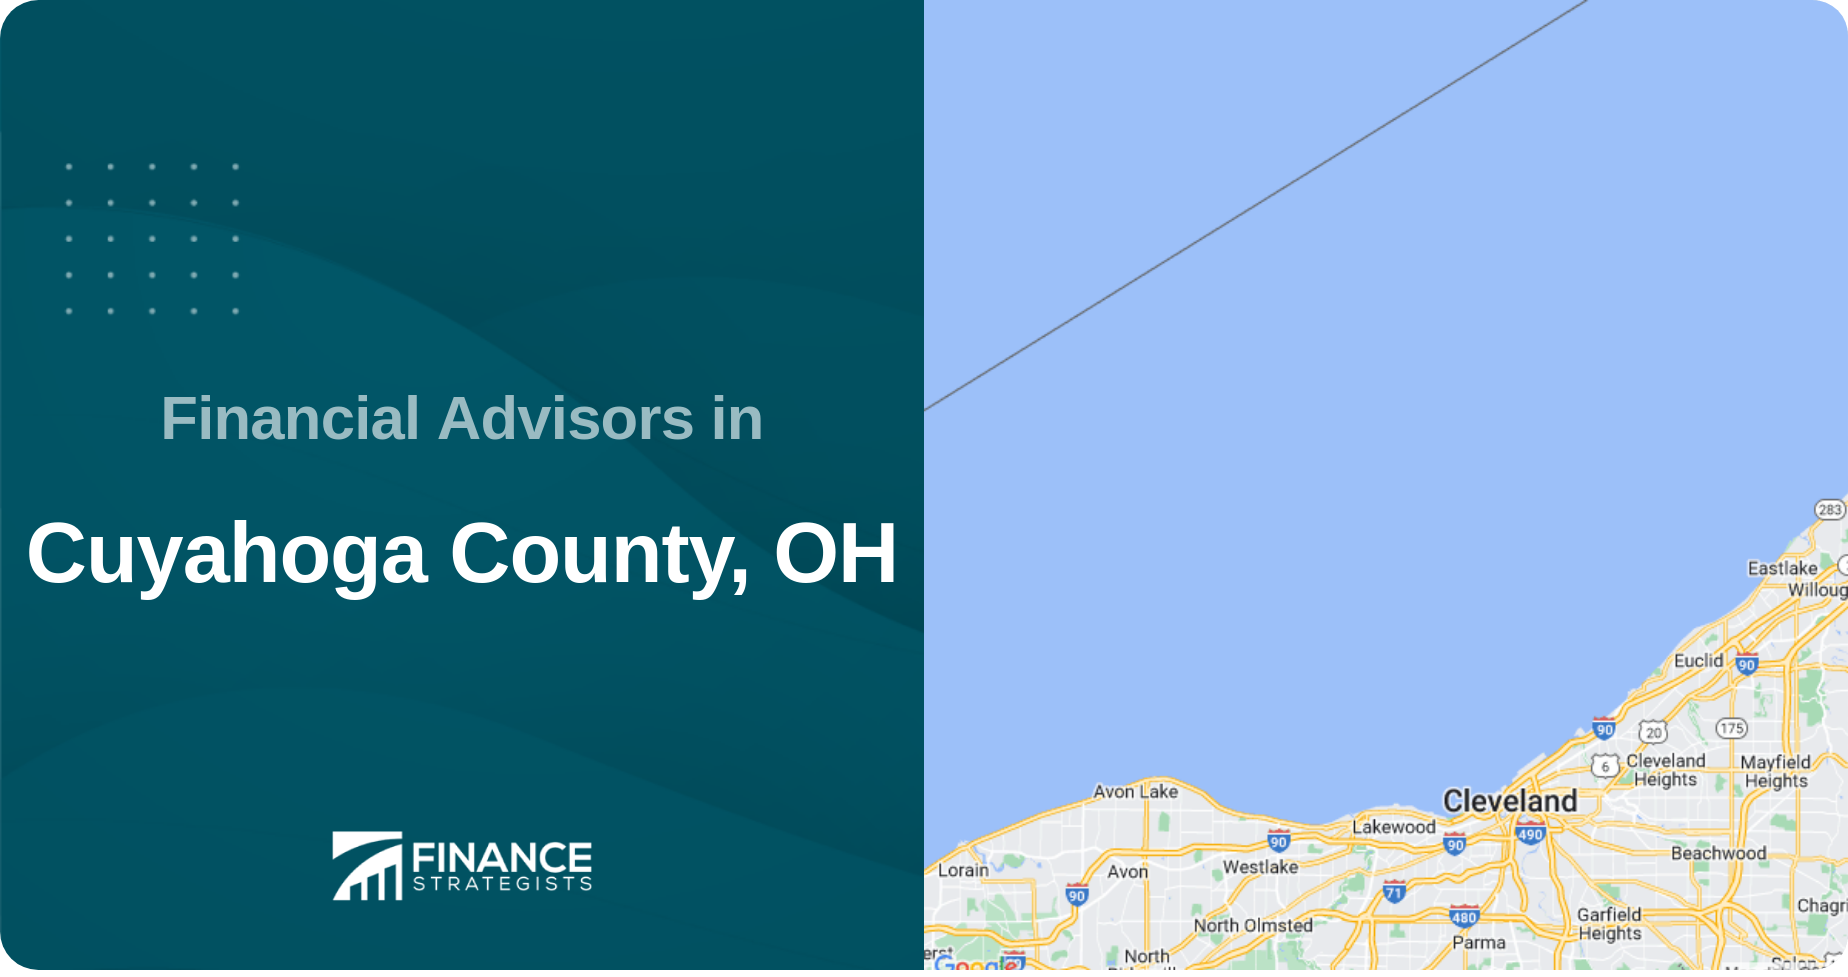 Financial Advisors in Cuyahoga County, OH